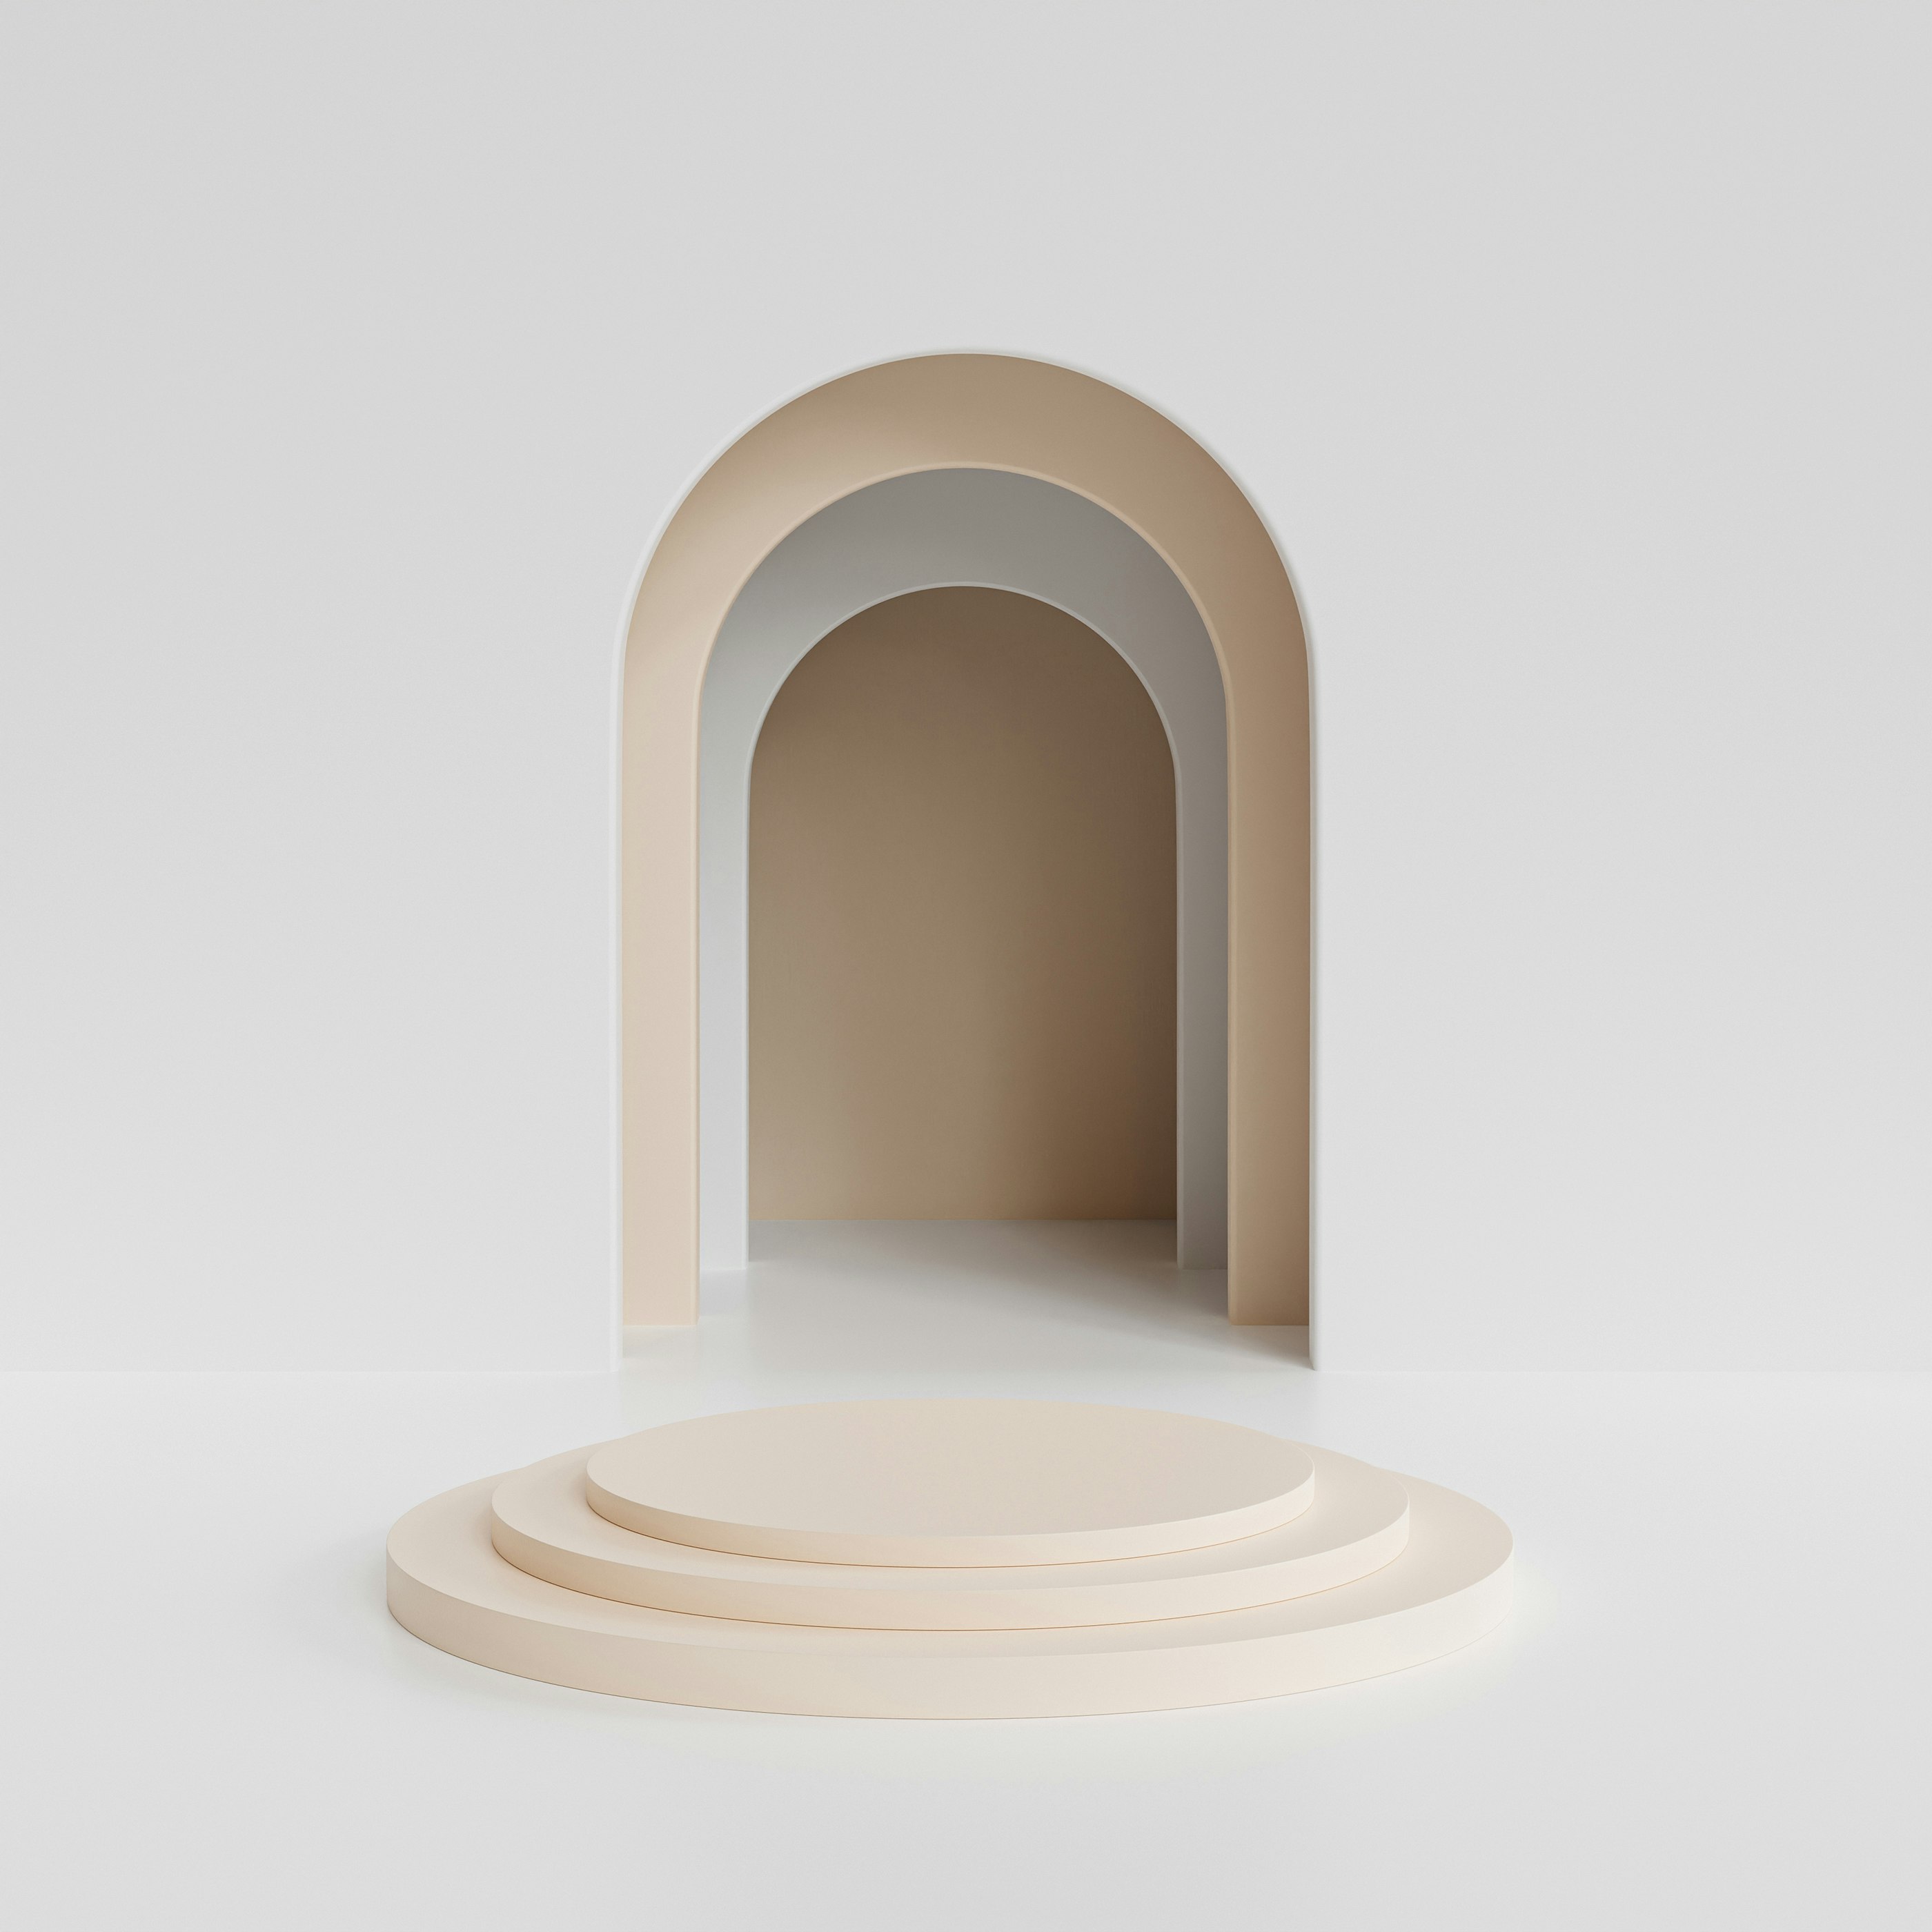 Beige cylinder podium or pedestal for products or advertising near to white empty entrance. 3D minimal rendering.